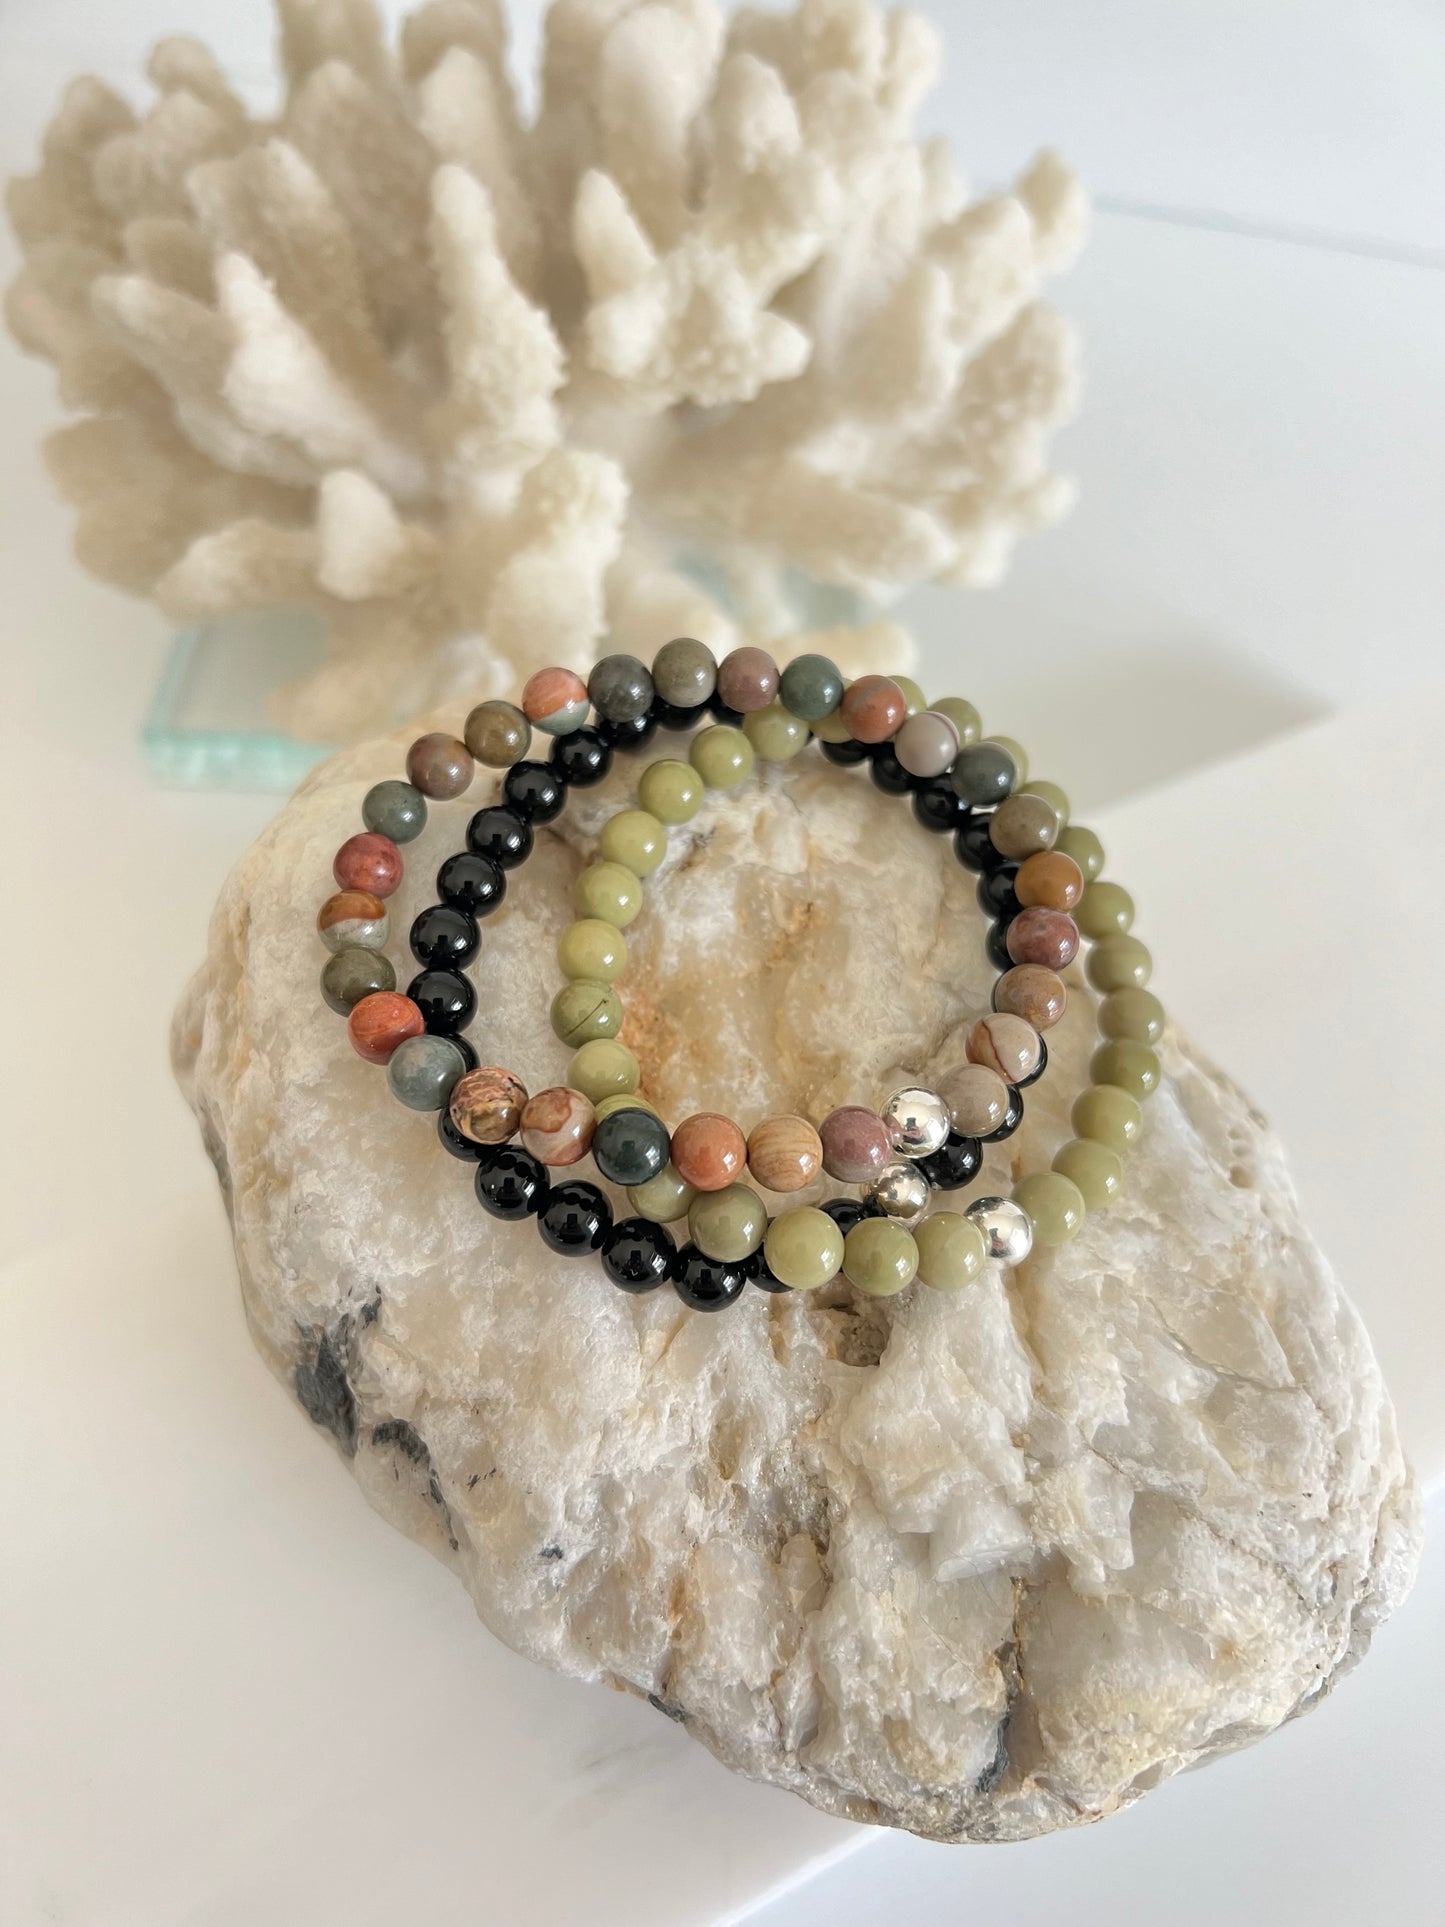 three stretch bracelets on top of a whitish and brown rock with a white piece of coral behind it. the bracelets are multi brown, red and green colored on the top, then avocado green in the middle and a black one on the bottom